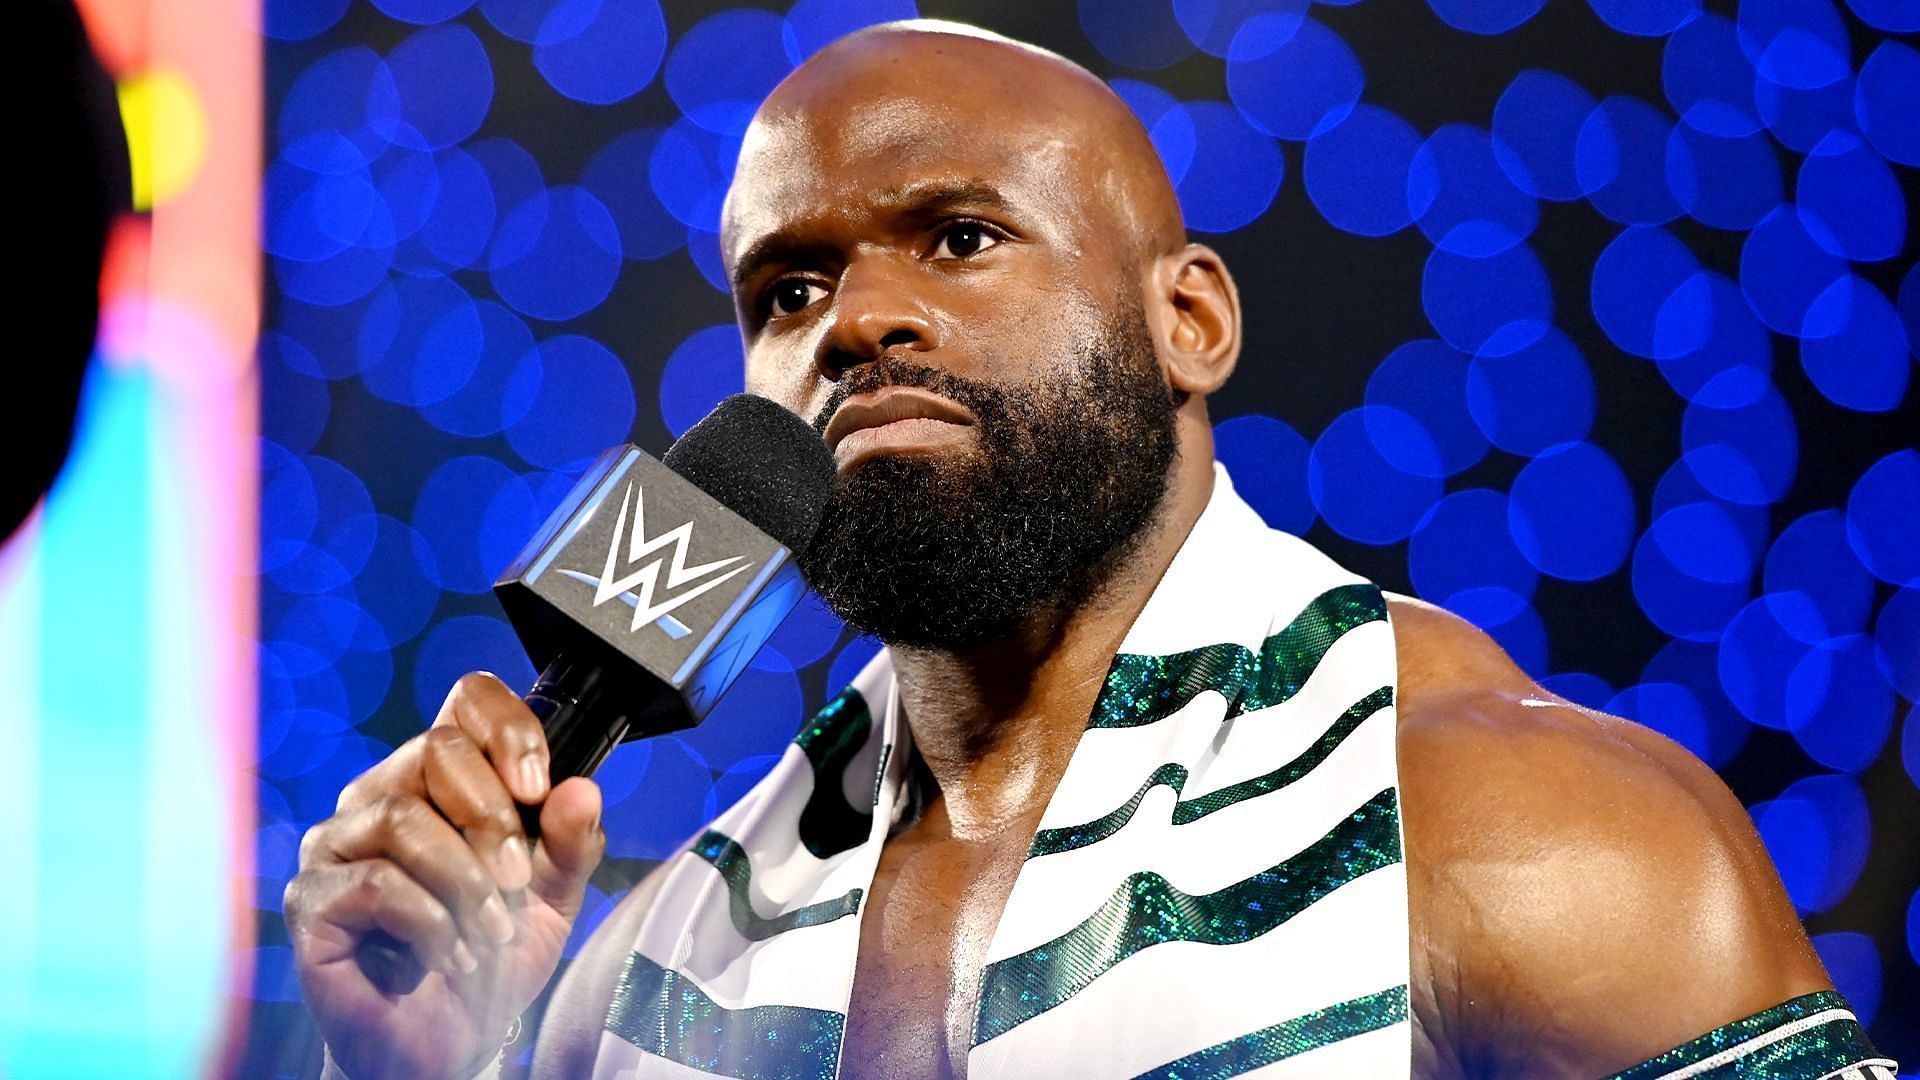 Apollo Crews wants to form a stable in 2022.